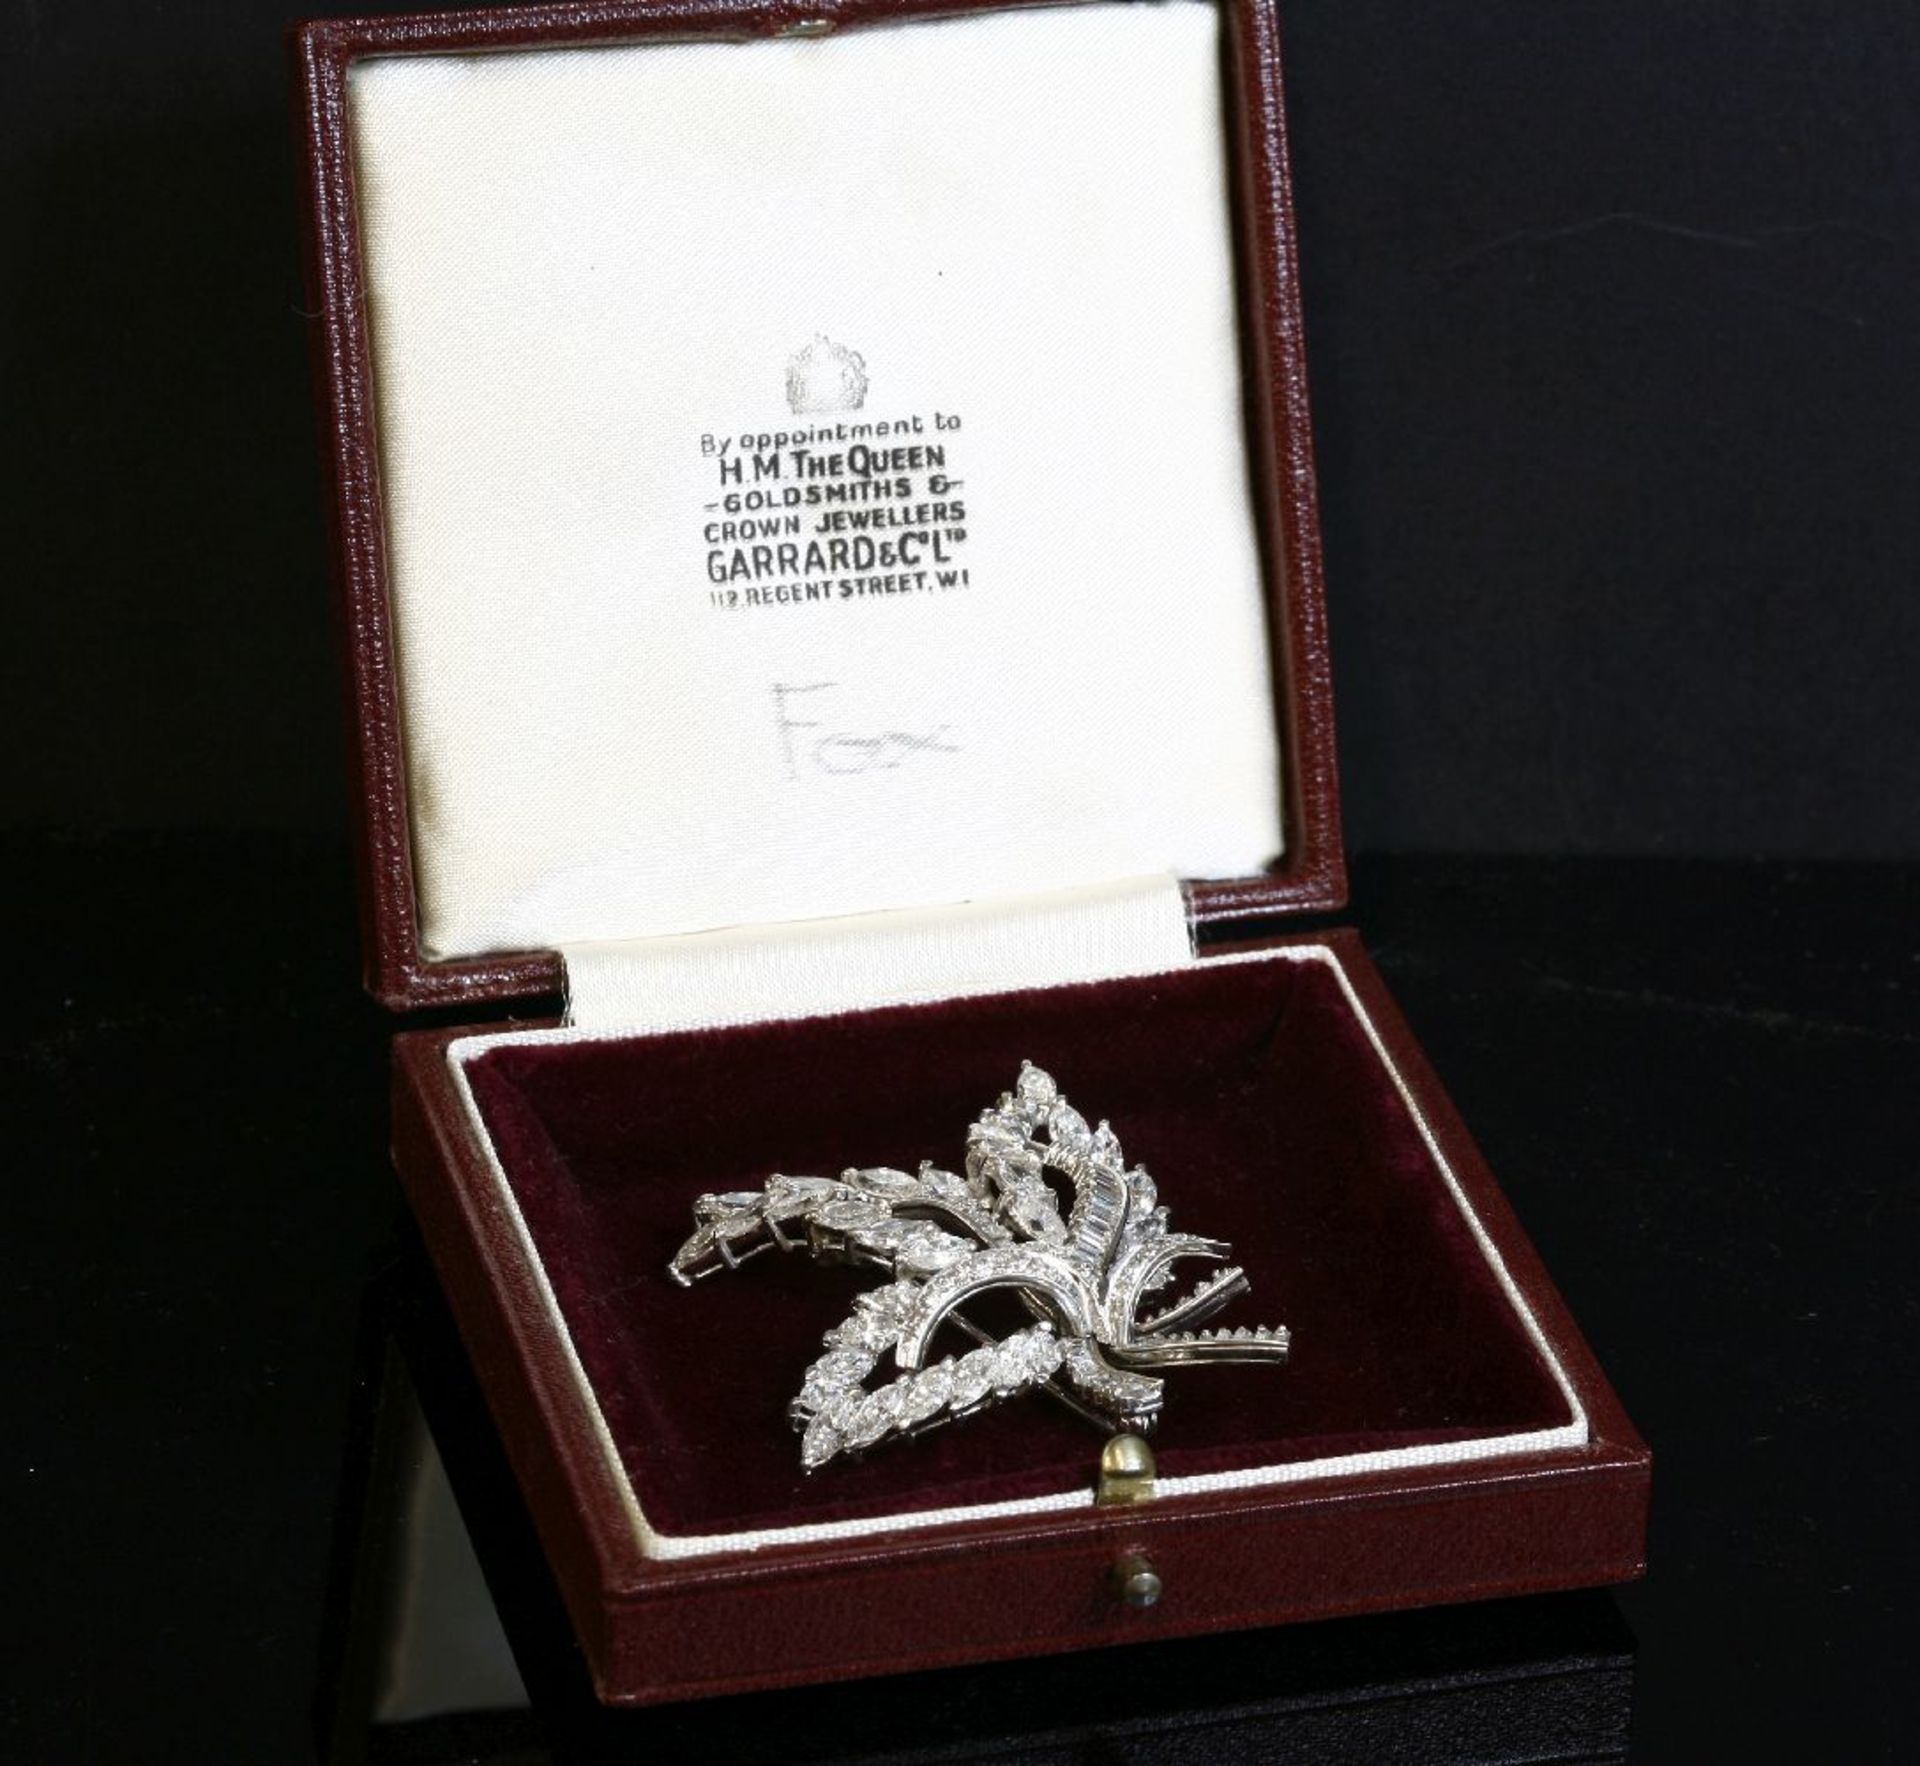 A platinum and diamond set leaf spray brooch, c.1950, with a series of open leaf shapes composed - Image 2 of 2